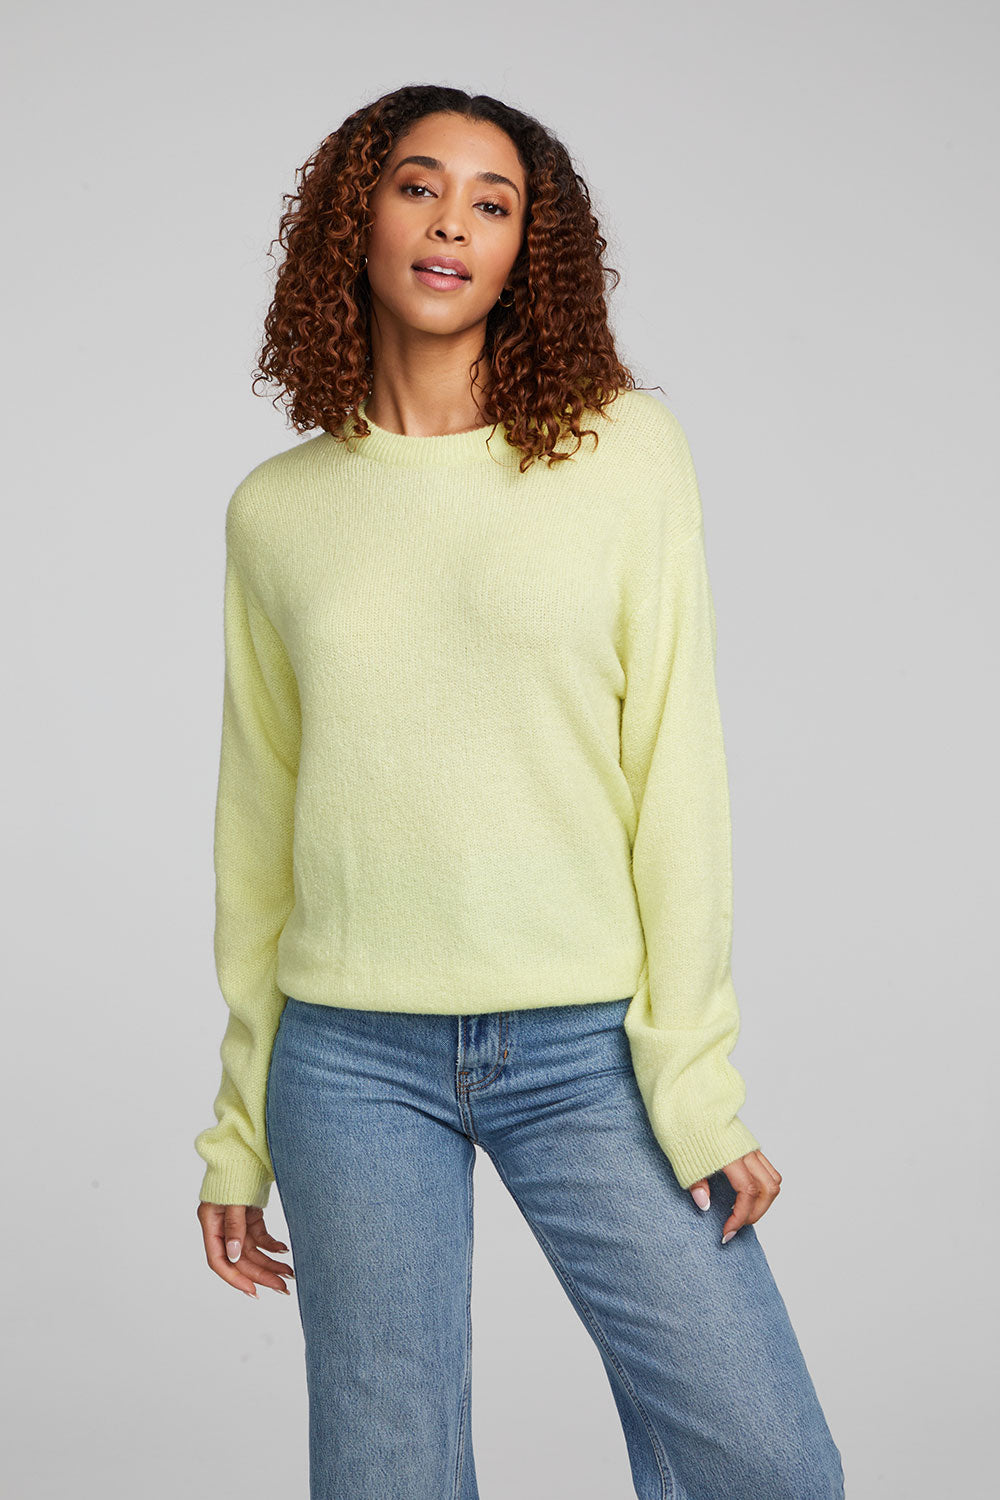 chaser-frankie-limelight-pullover-sweater-front-03